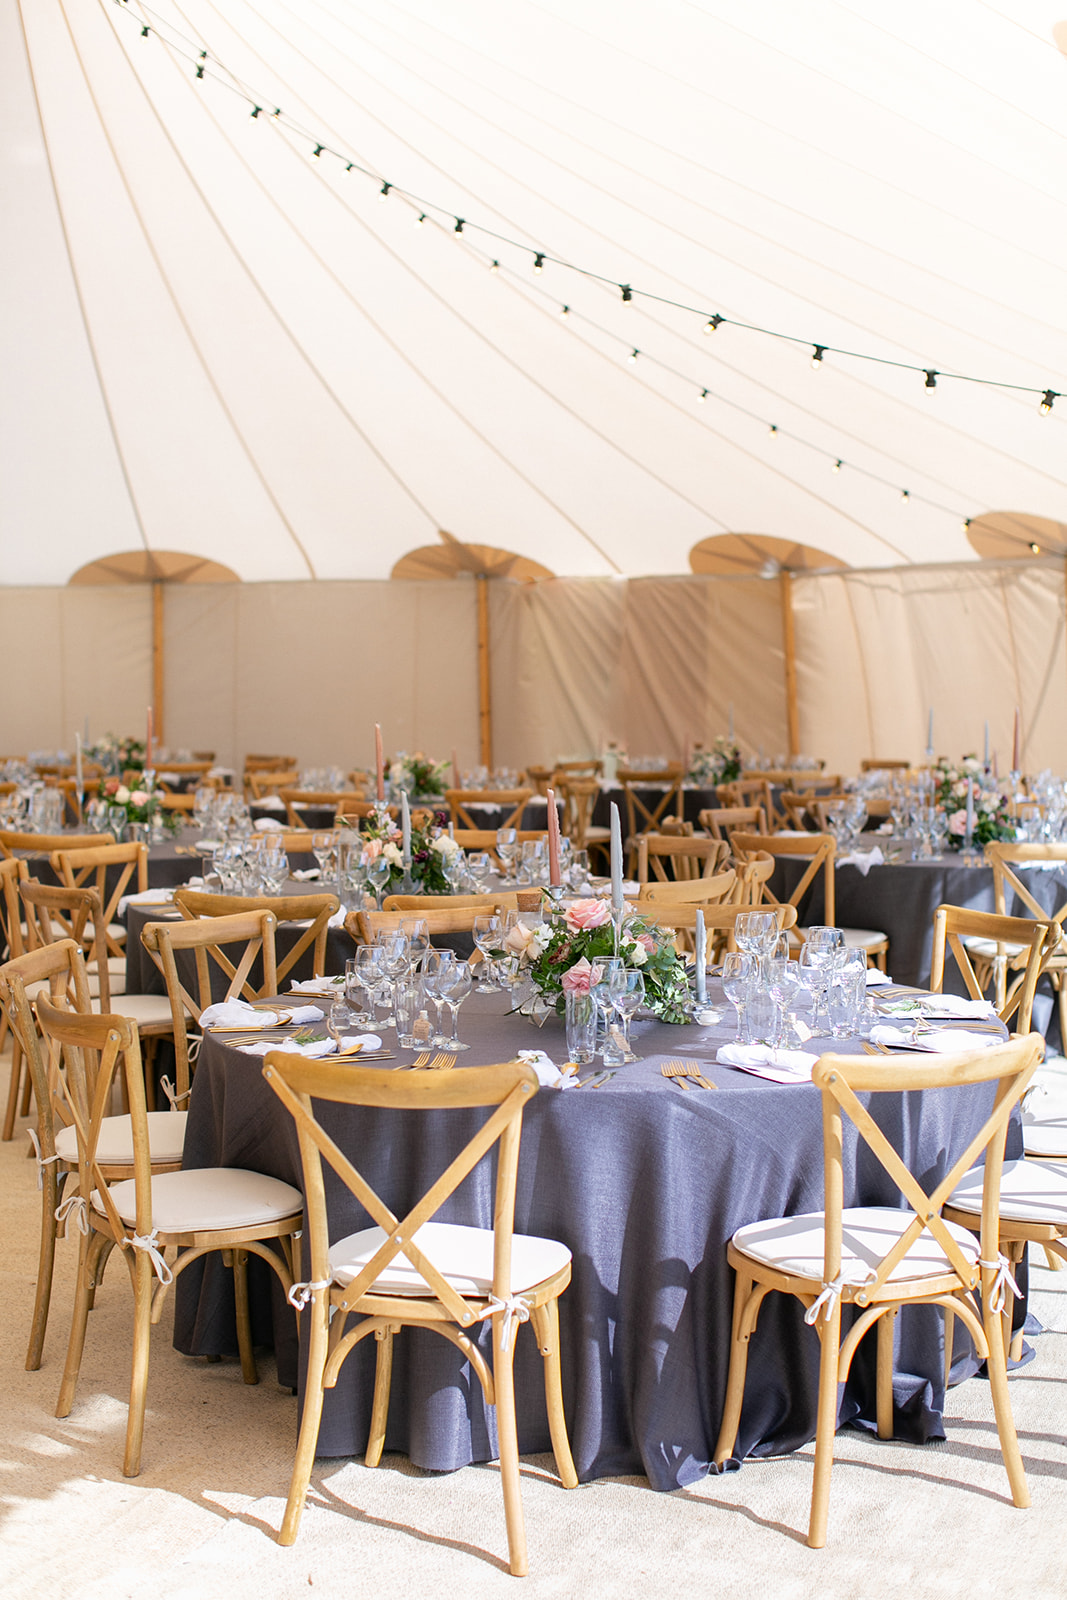 The Sperry Tent interior for Suzie & Charlie's Wedding Reception